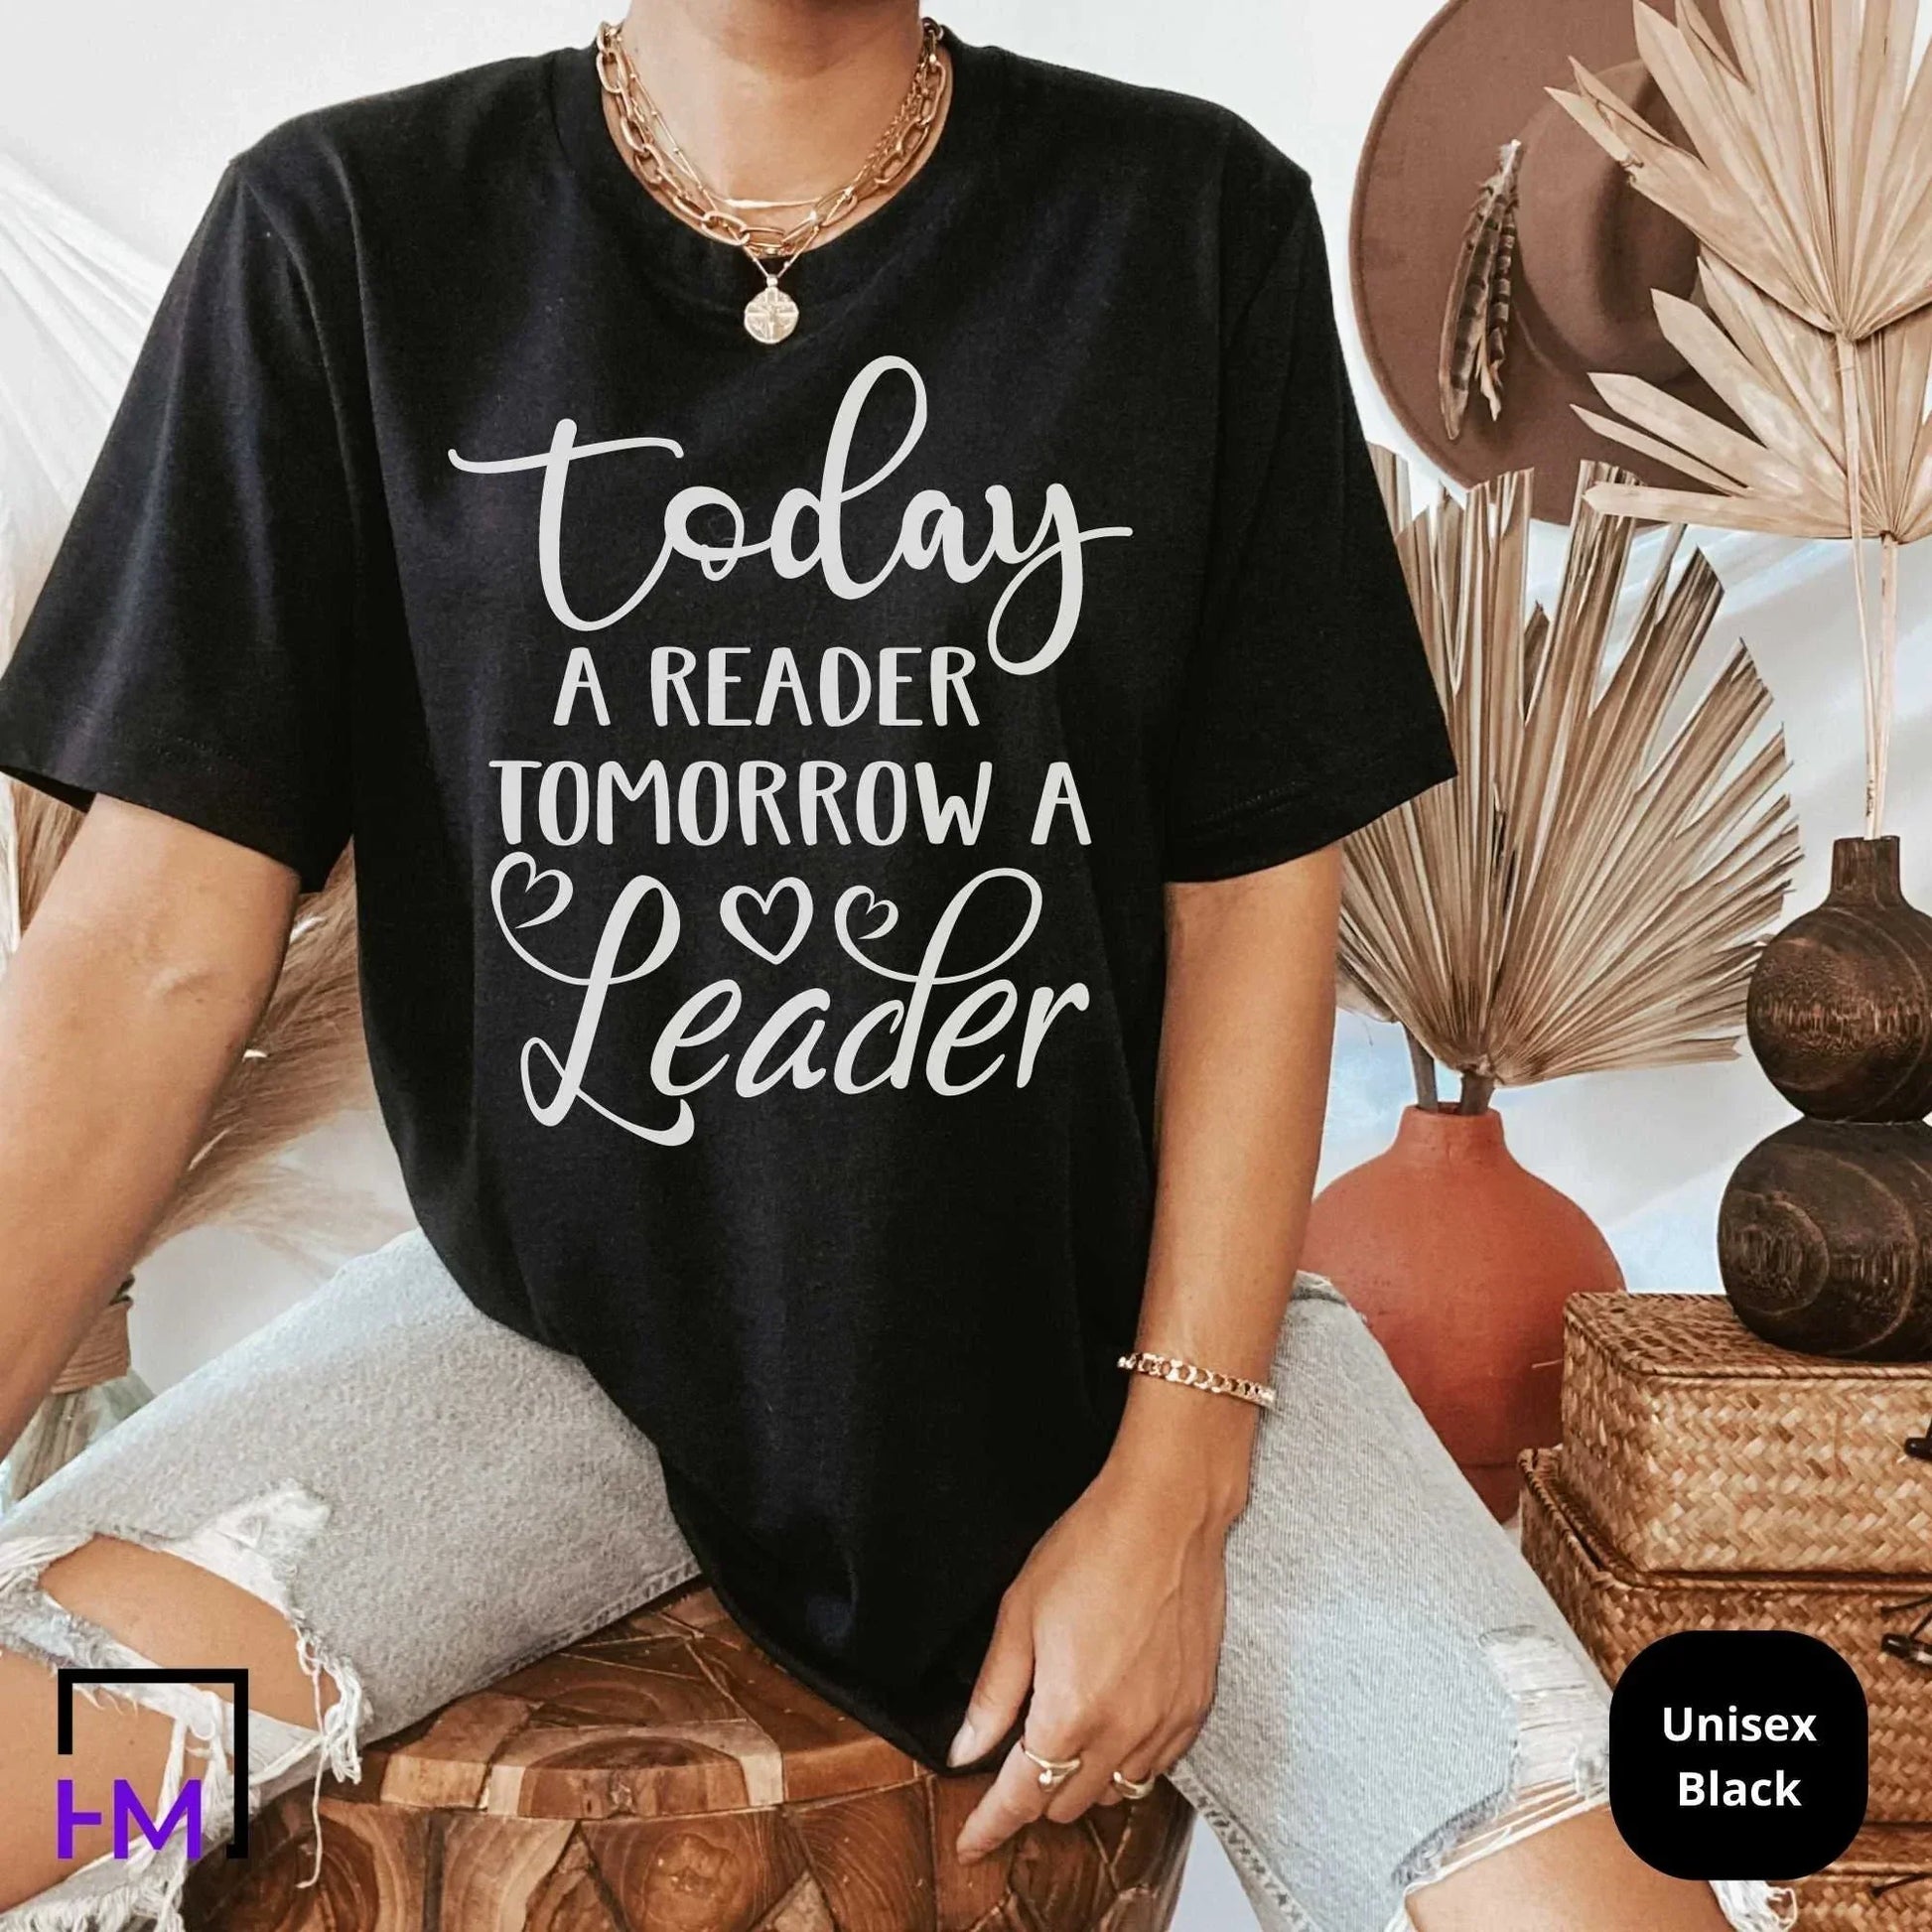 Book Lover Shirt | Reader Gift for Leaders, Bookworms, English Teachers, Librarian, Writer, Bookclubs, Nerds, Bosses | Appreciation Gift